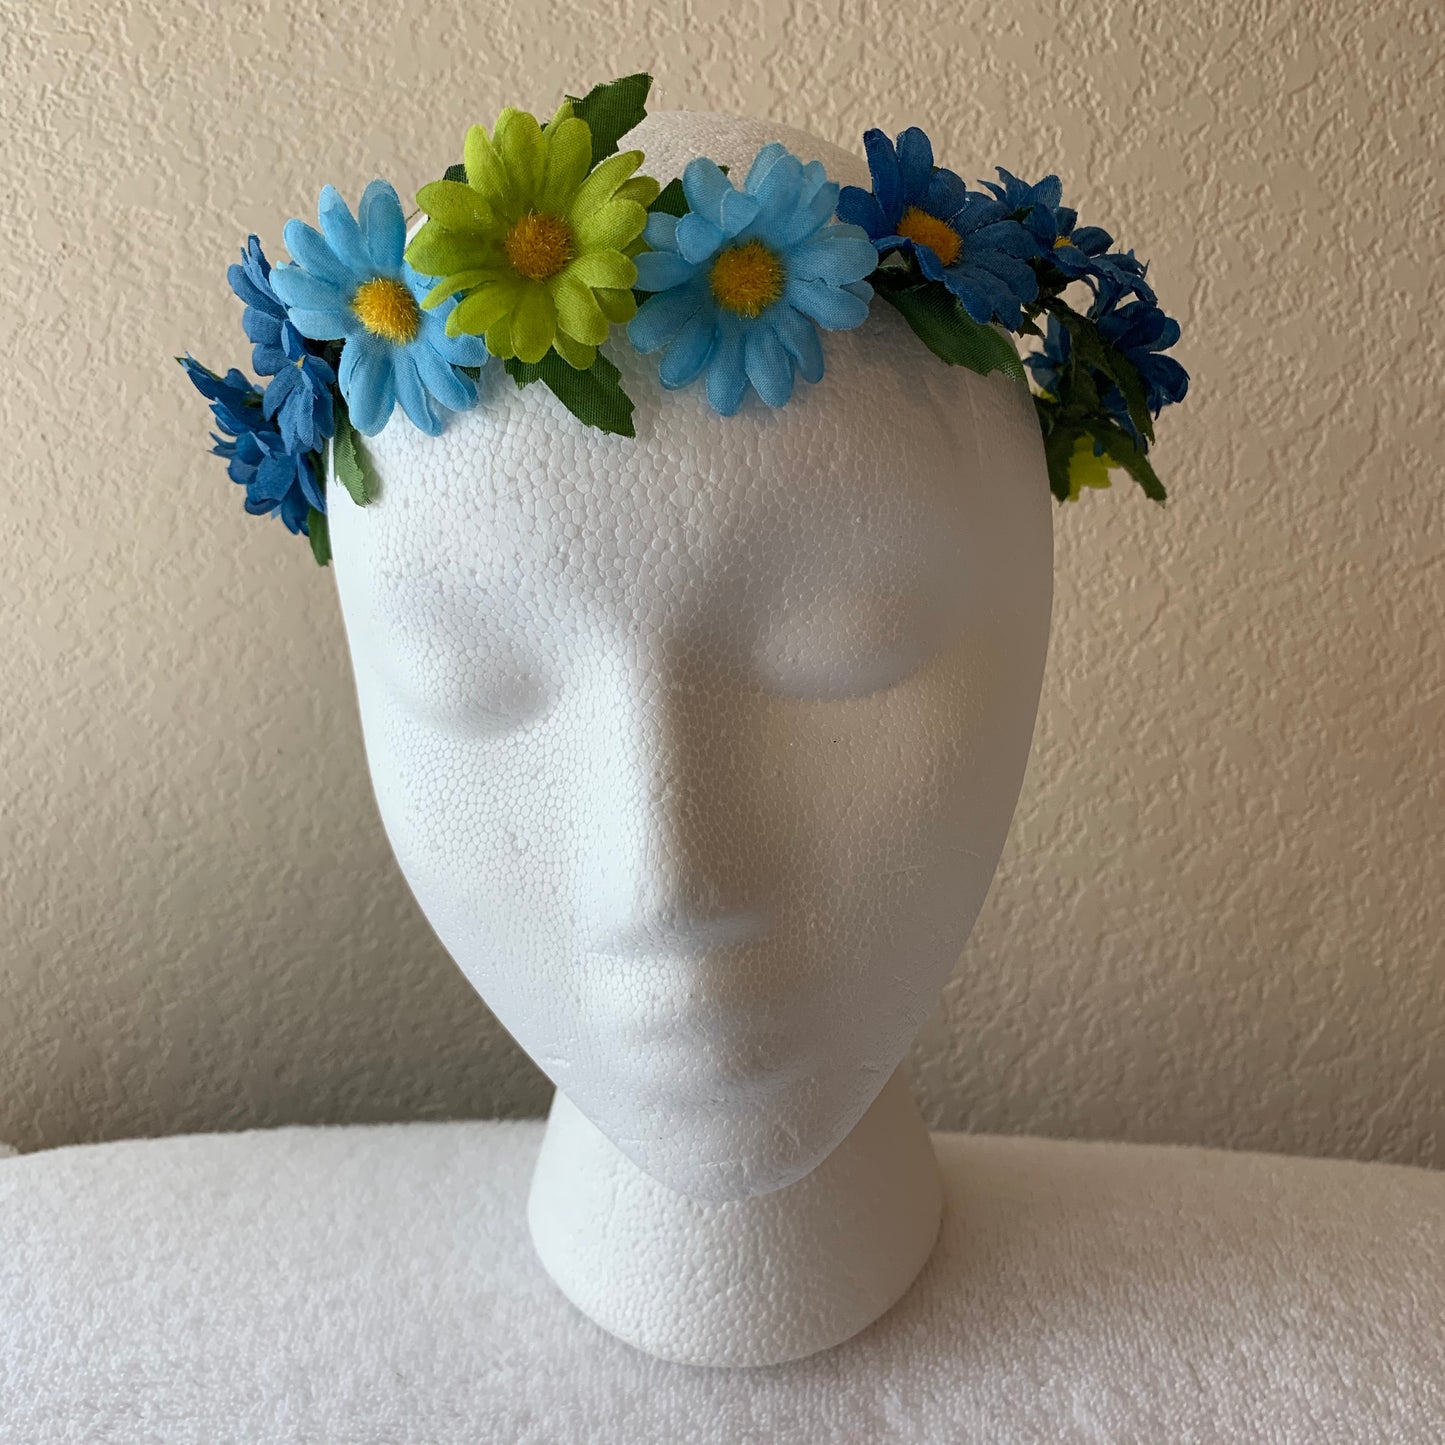 Extra Small Wreath - Dark Blue, Two Light Blue, and Three Lime Green Daisies